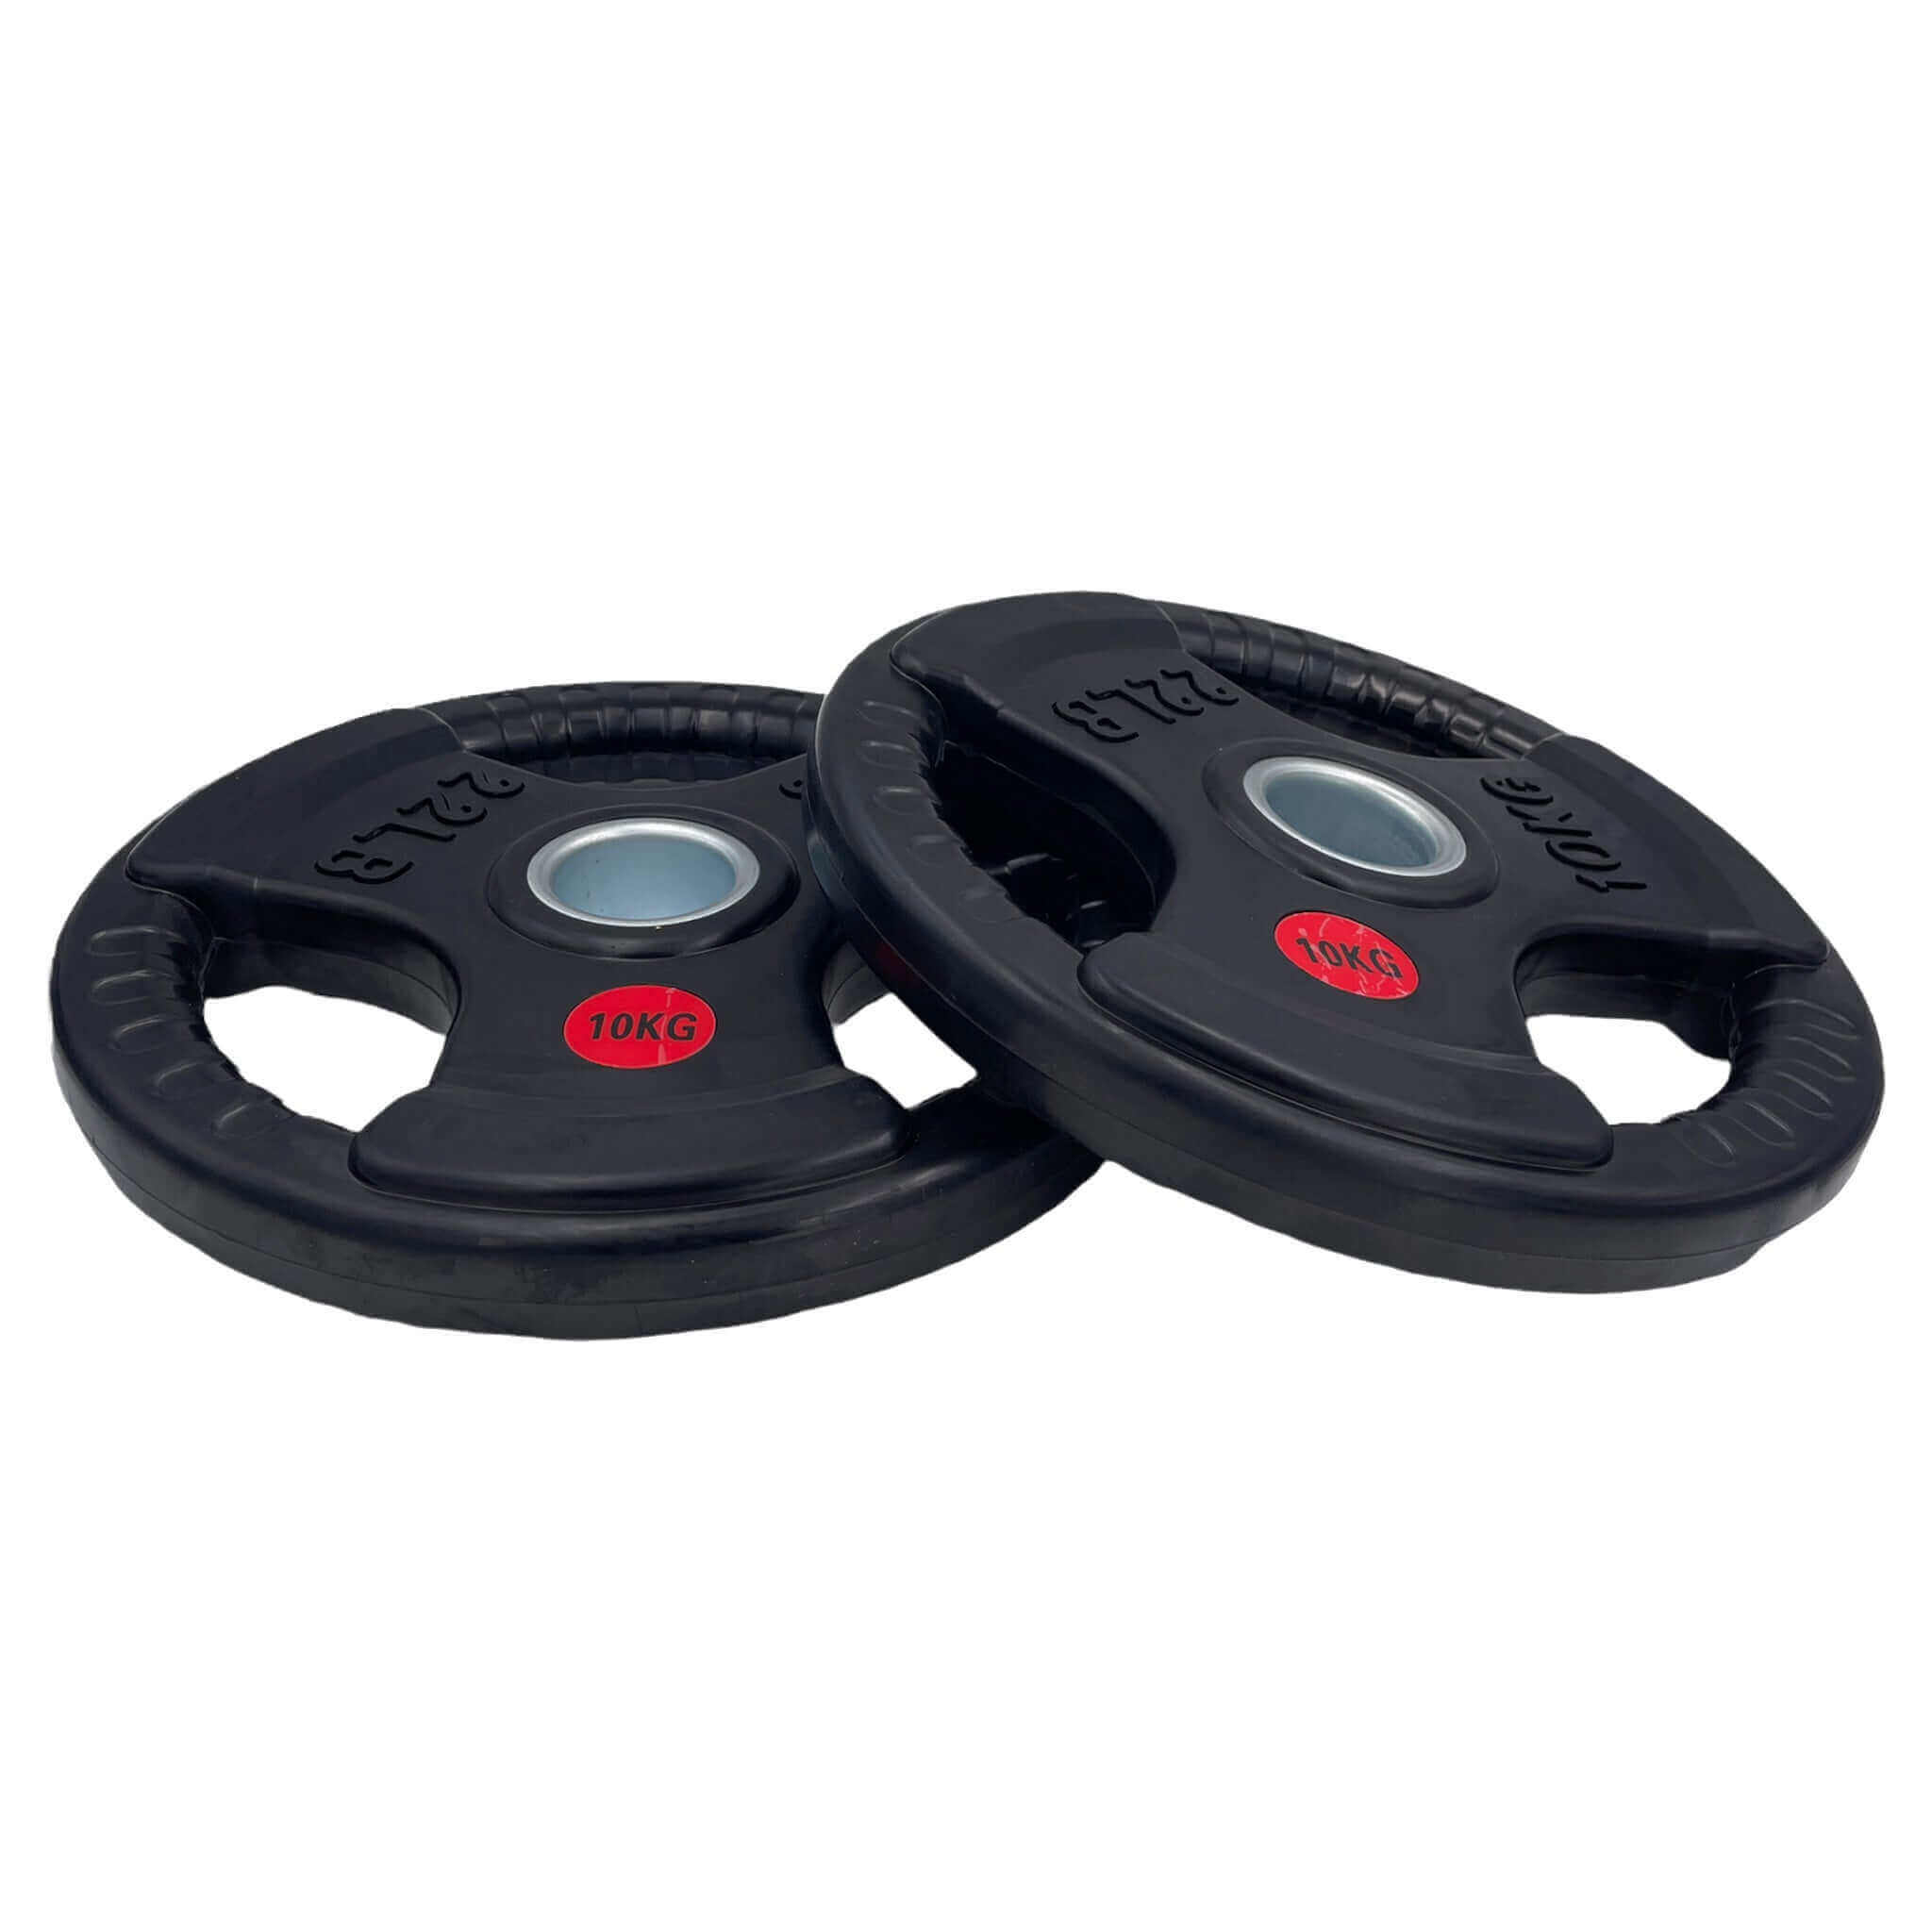 37.5kg Tri Grip Rubber Weight Plate Set with 1.2m Straight Bar | INSOURCE